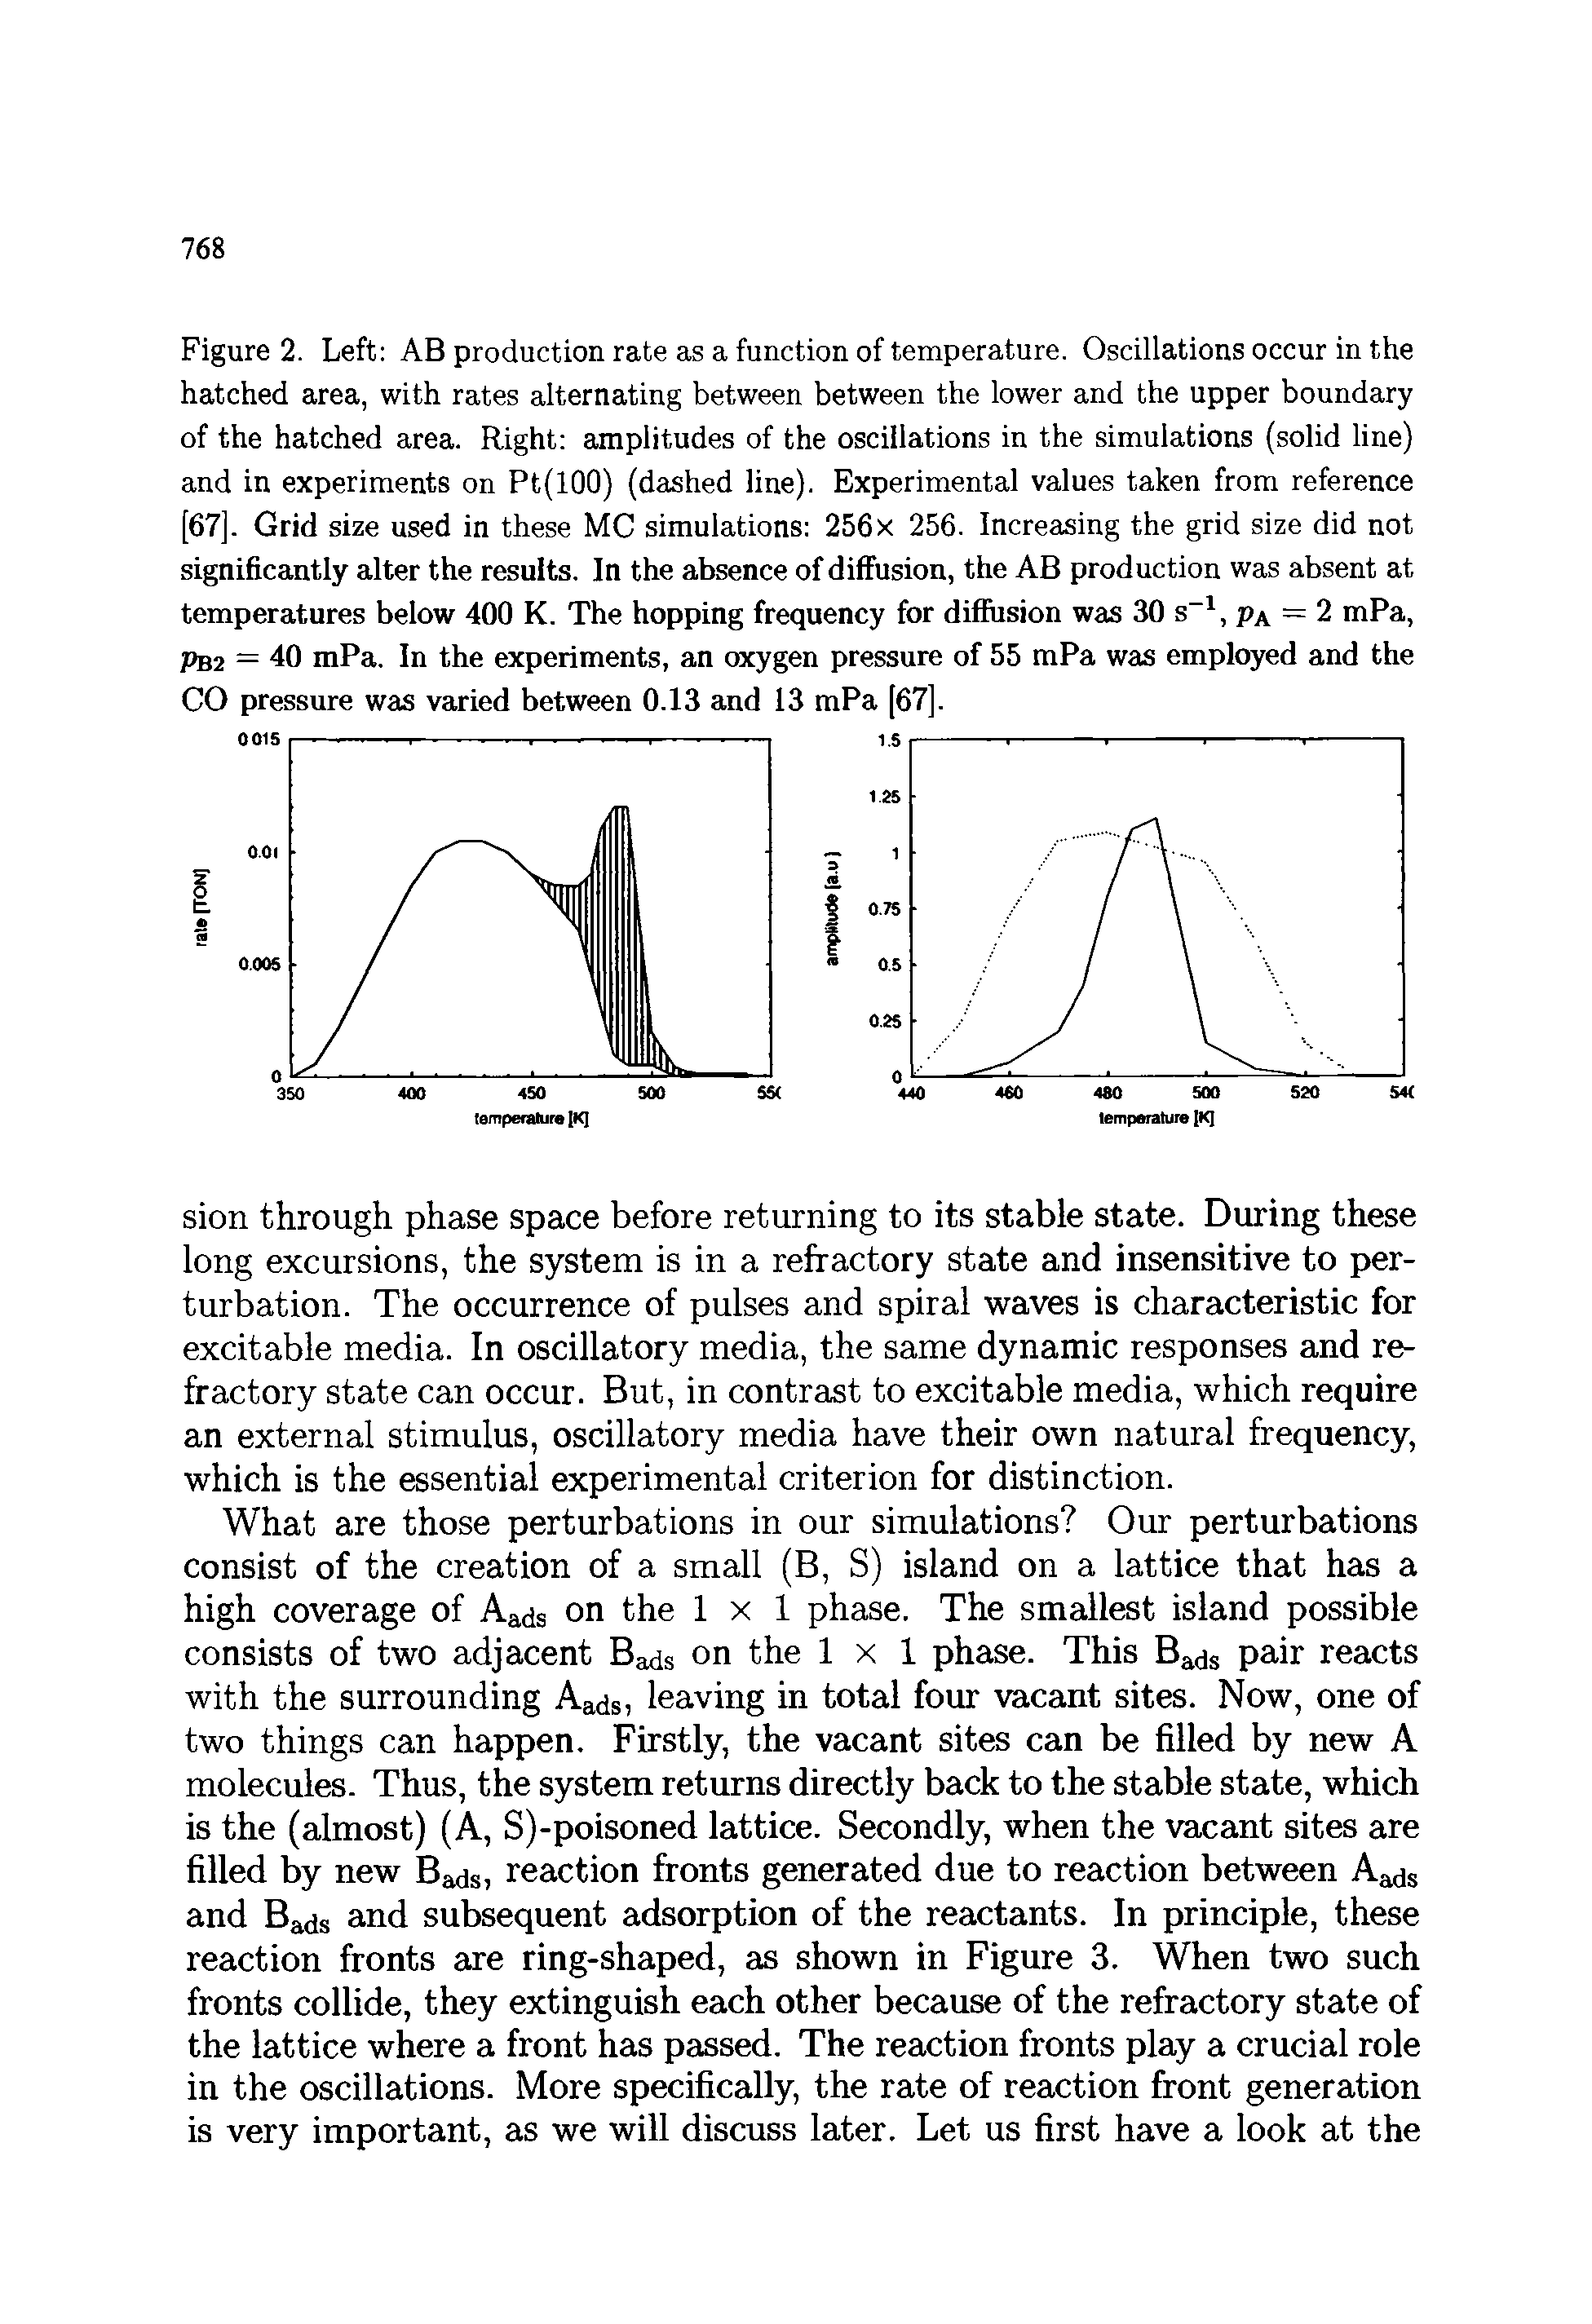 Figure 2. Left AB production rate as a function of temperature. Oscillations occur in the hatched area, with rates alternating between between the lower and the upper boundary of the hatched area. Right amplitudes of the oscillations in the simulations (solid line) and in experiments on Pt(lOO) (dashed line). Experimental values taken from reference [67]. Grid size used in these MC simulations 256x 256. Increasing the grid size did not significantly alter the results. In the absence of diffusion, the AB production was absent at temperatures below 400 K. The hopping frequency for diffusion was 30 s , Pa = 2 mPa, Pb2 = 40 mPa. In the experiments, an oxygen pressure of 55 mPa was employed and the CO pressure was varied between 0.13 and 13 mPa [67].